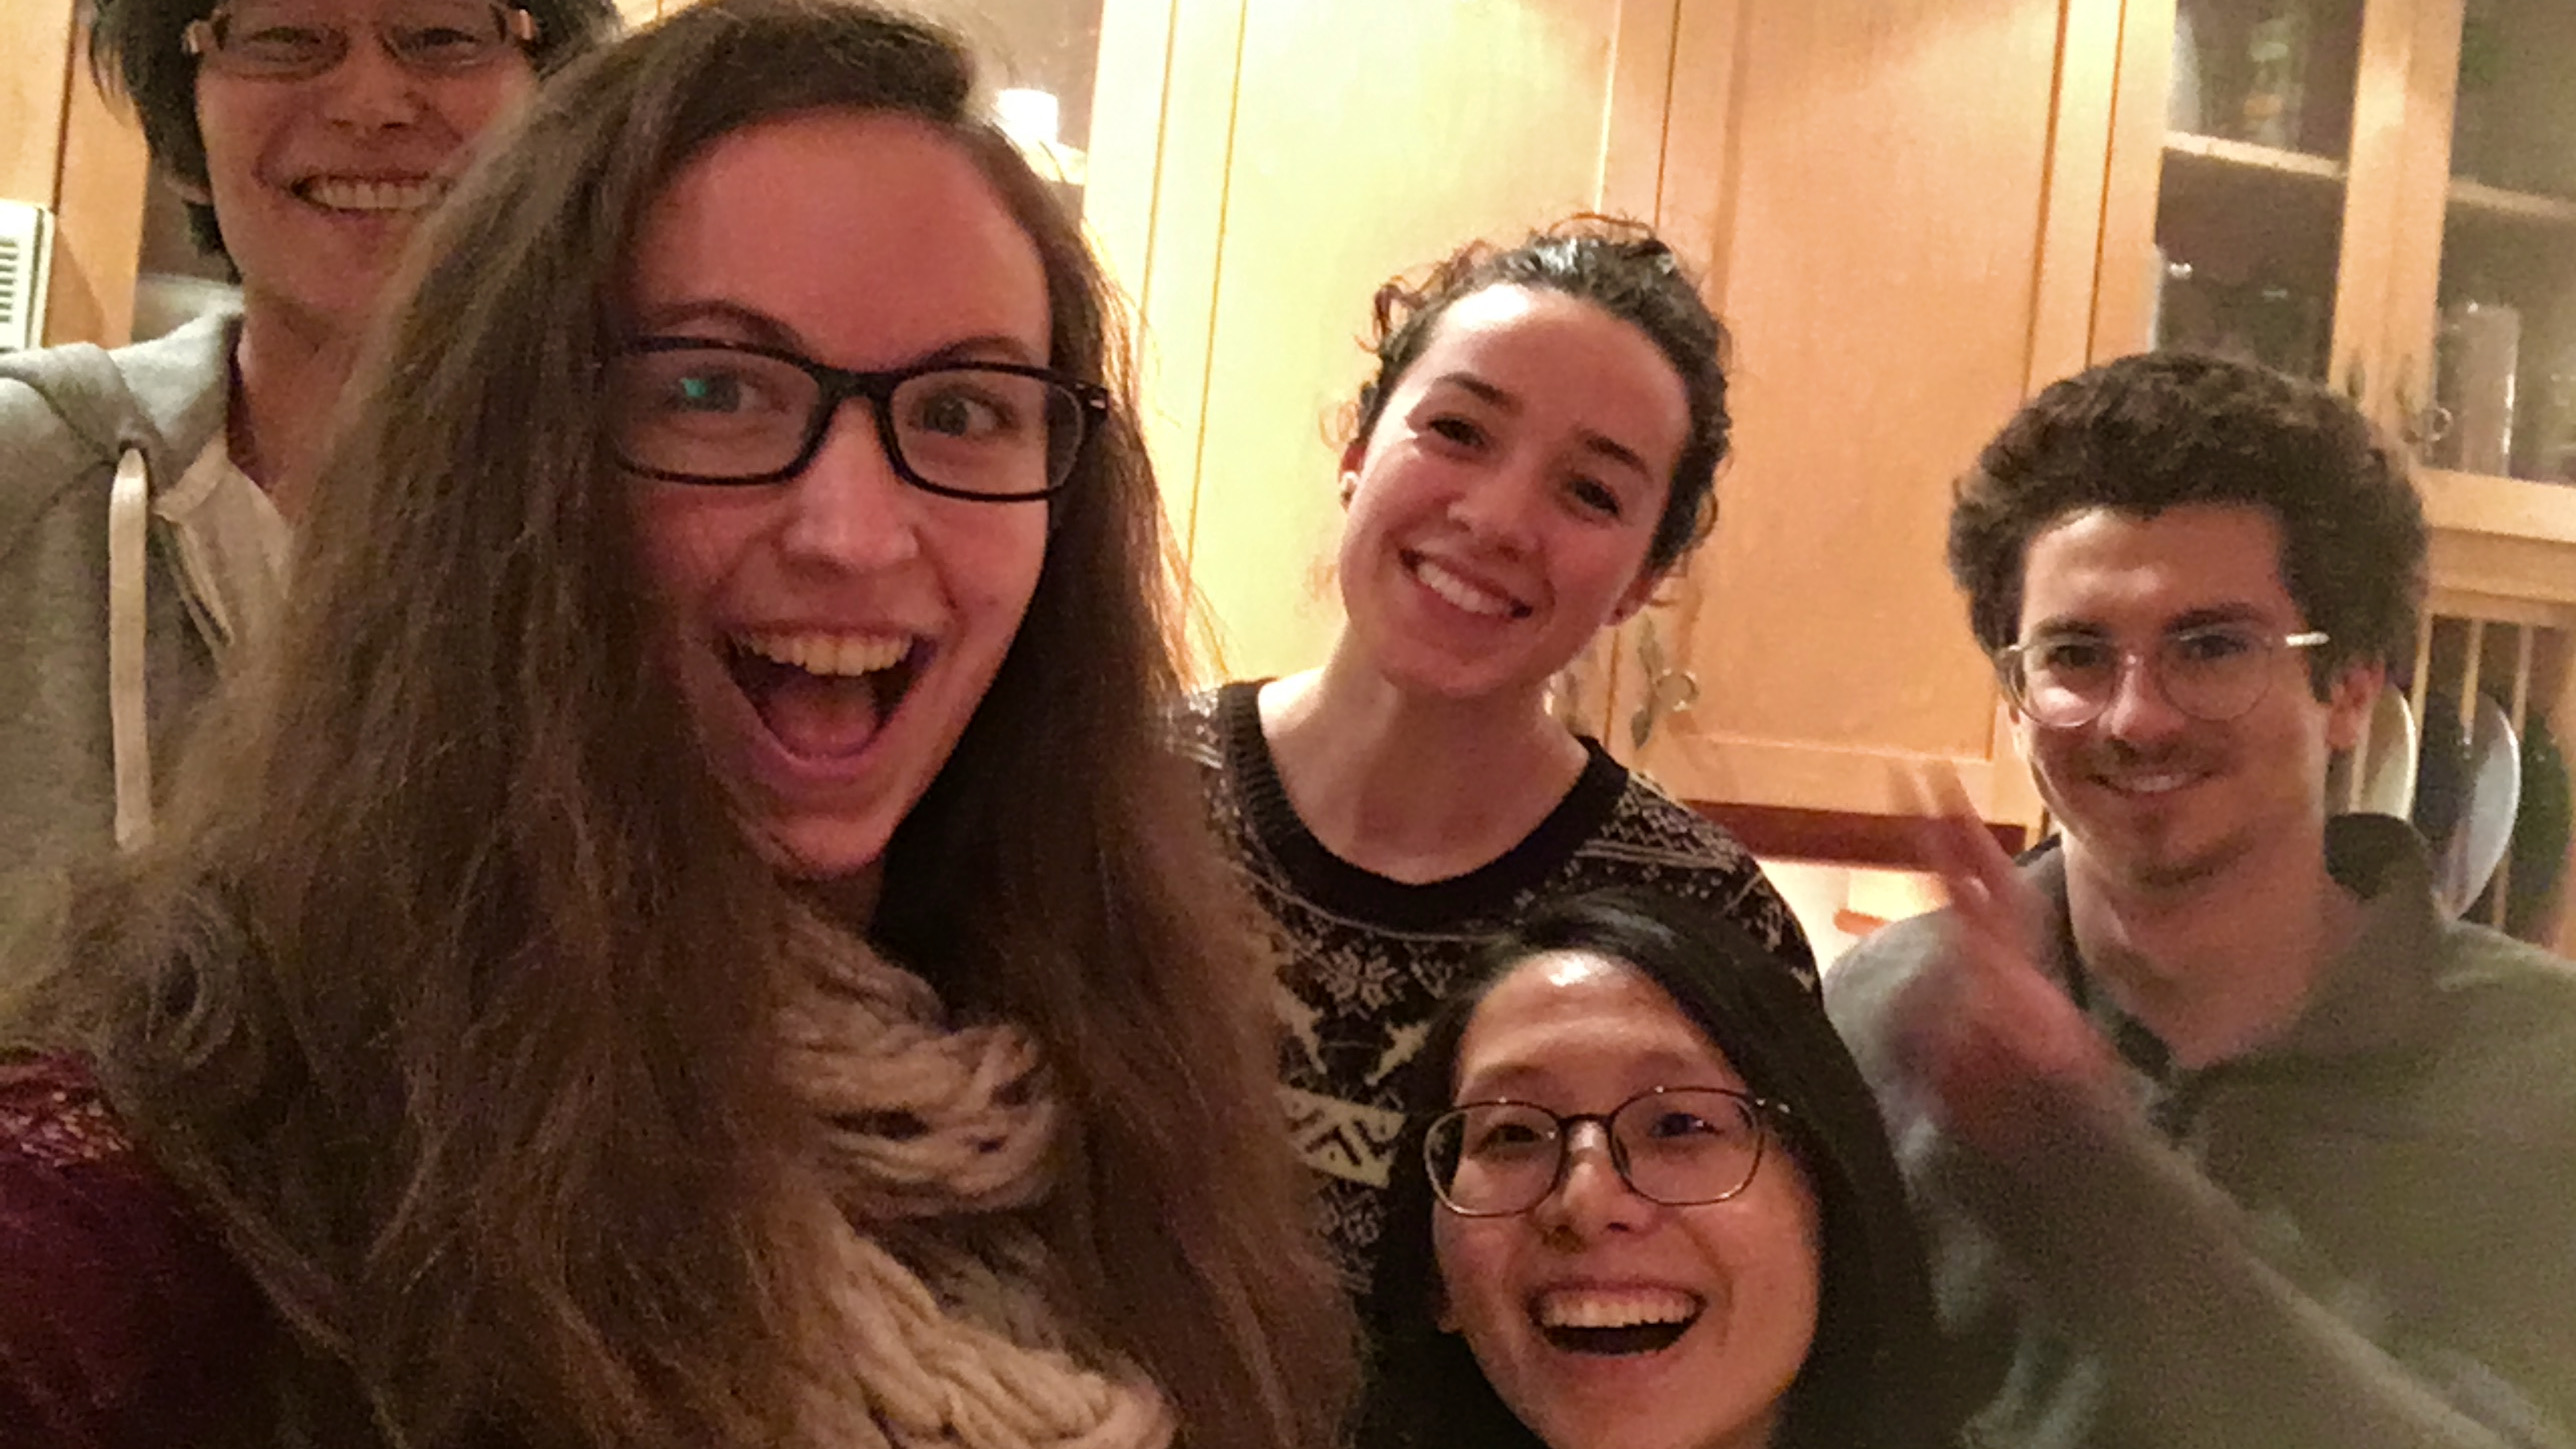 A selfie in a kitchen in the evening, showing five graduate students smiling and laughing at the camera.